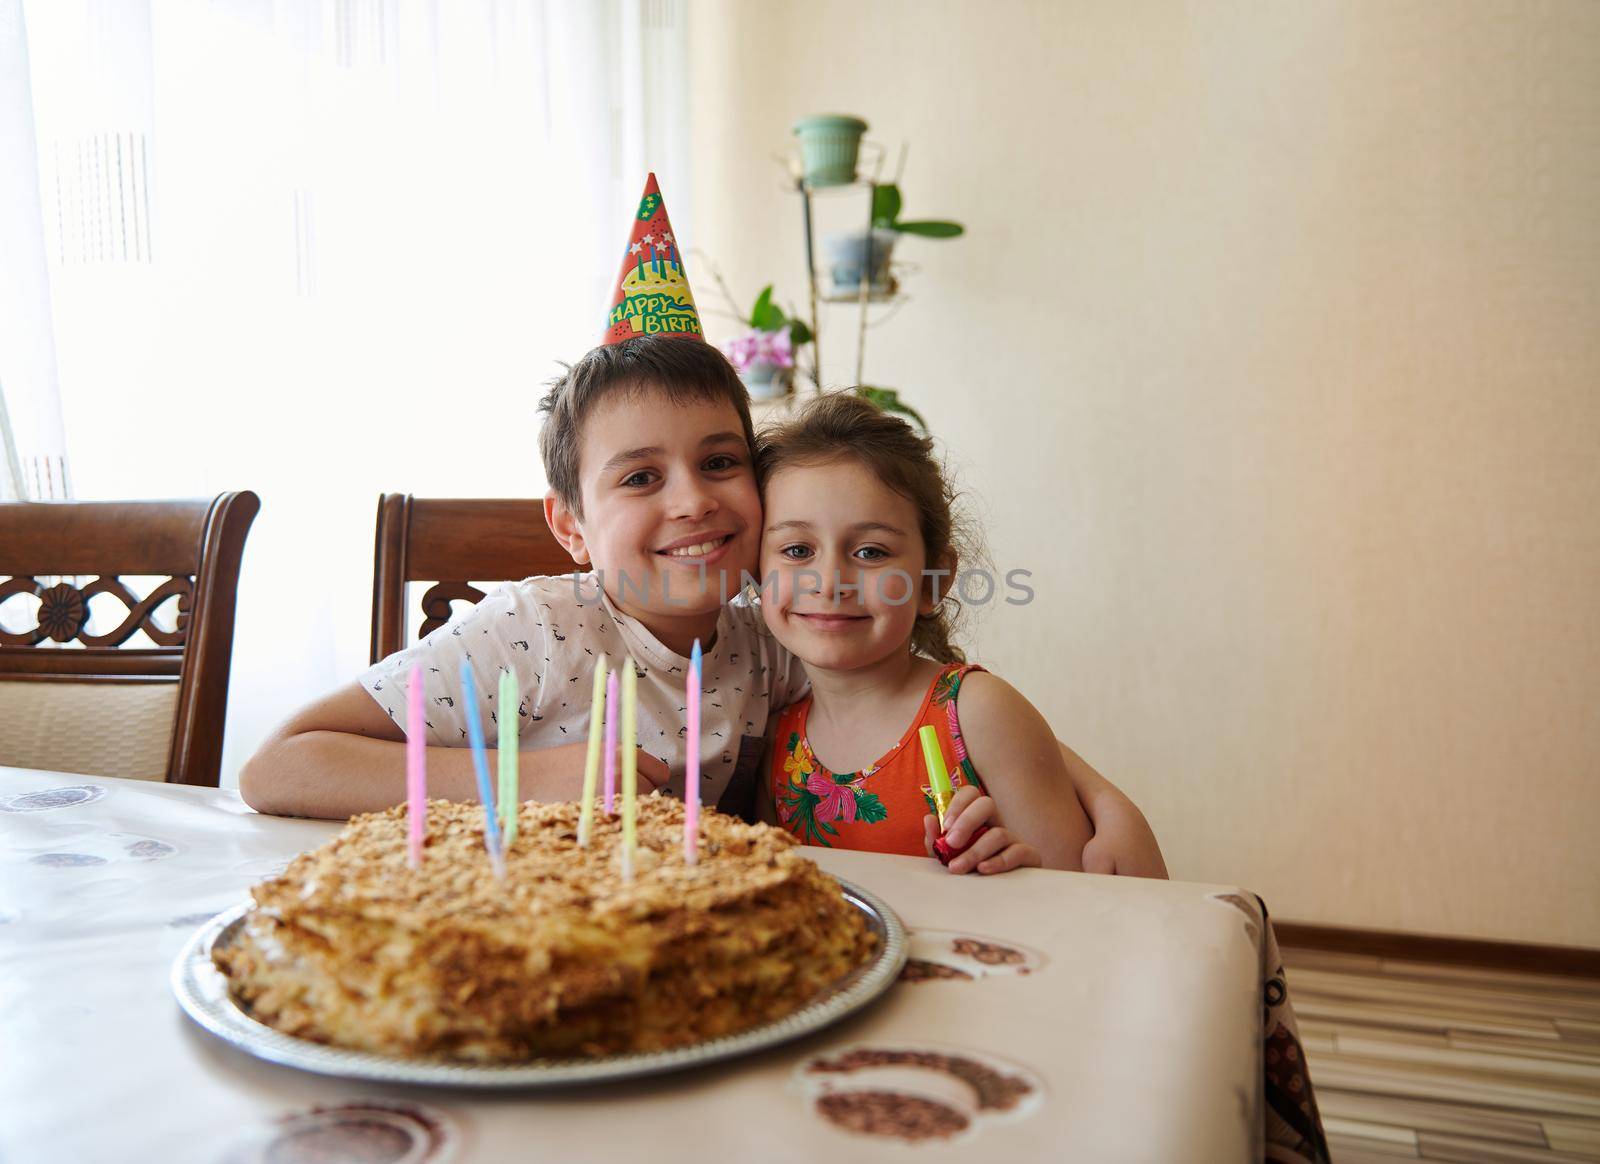 Portrait of two adorable cute children, brother and sister, sitting at the table with a birthday cake decorated with long colorful candles. Anniversary and birthday party concept by artgf